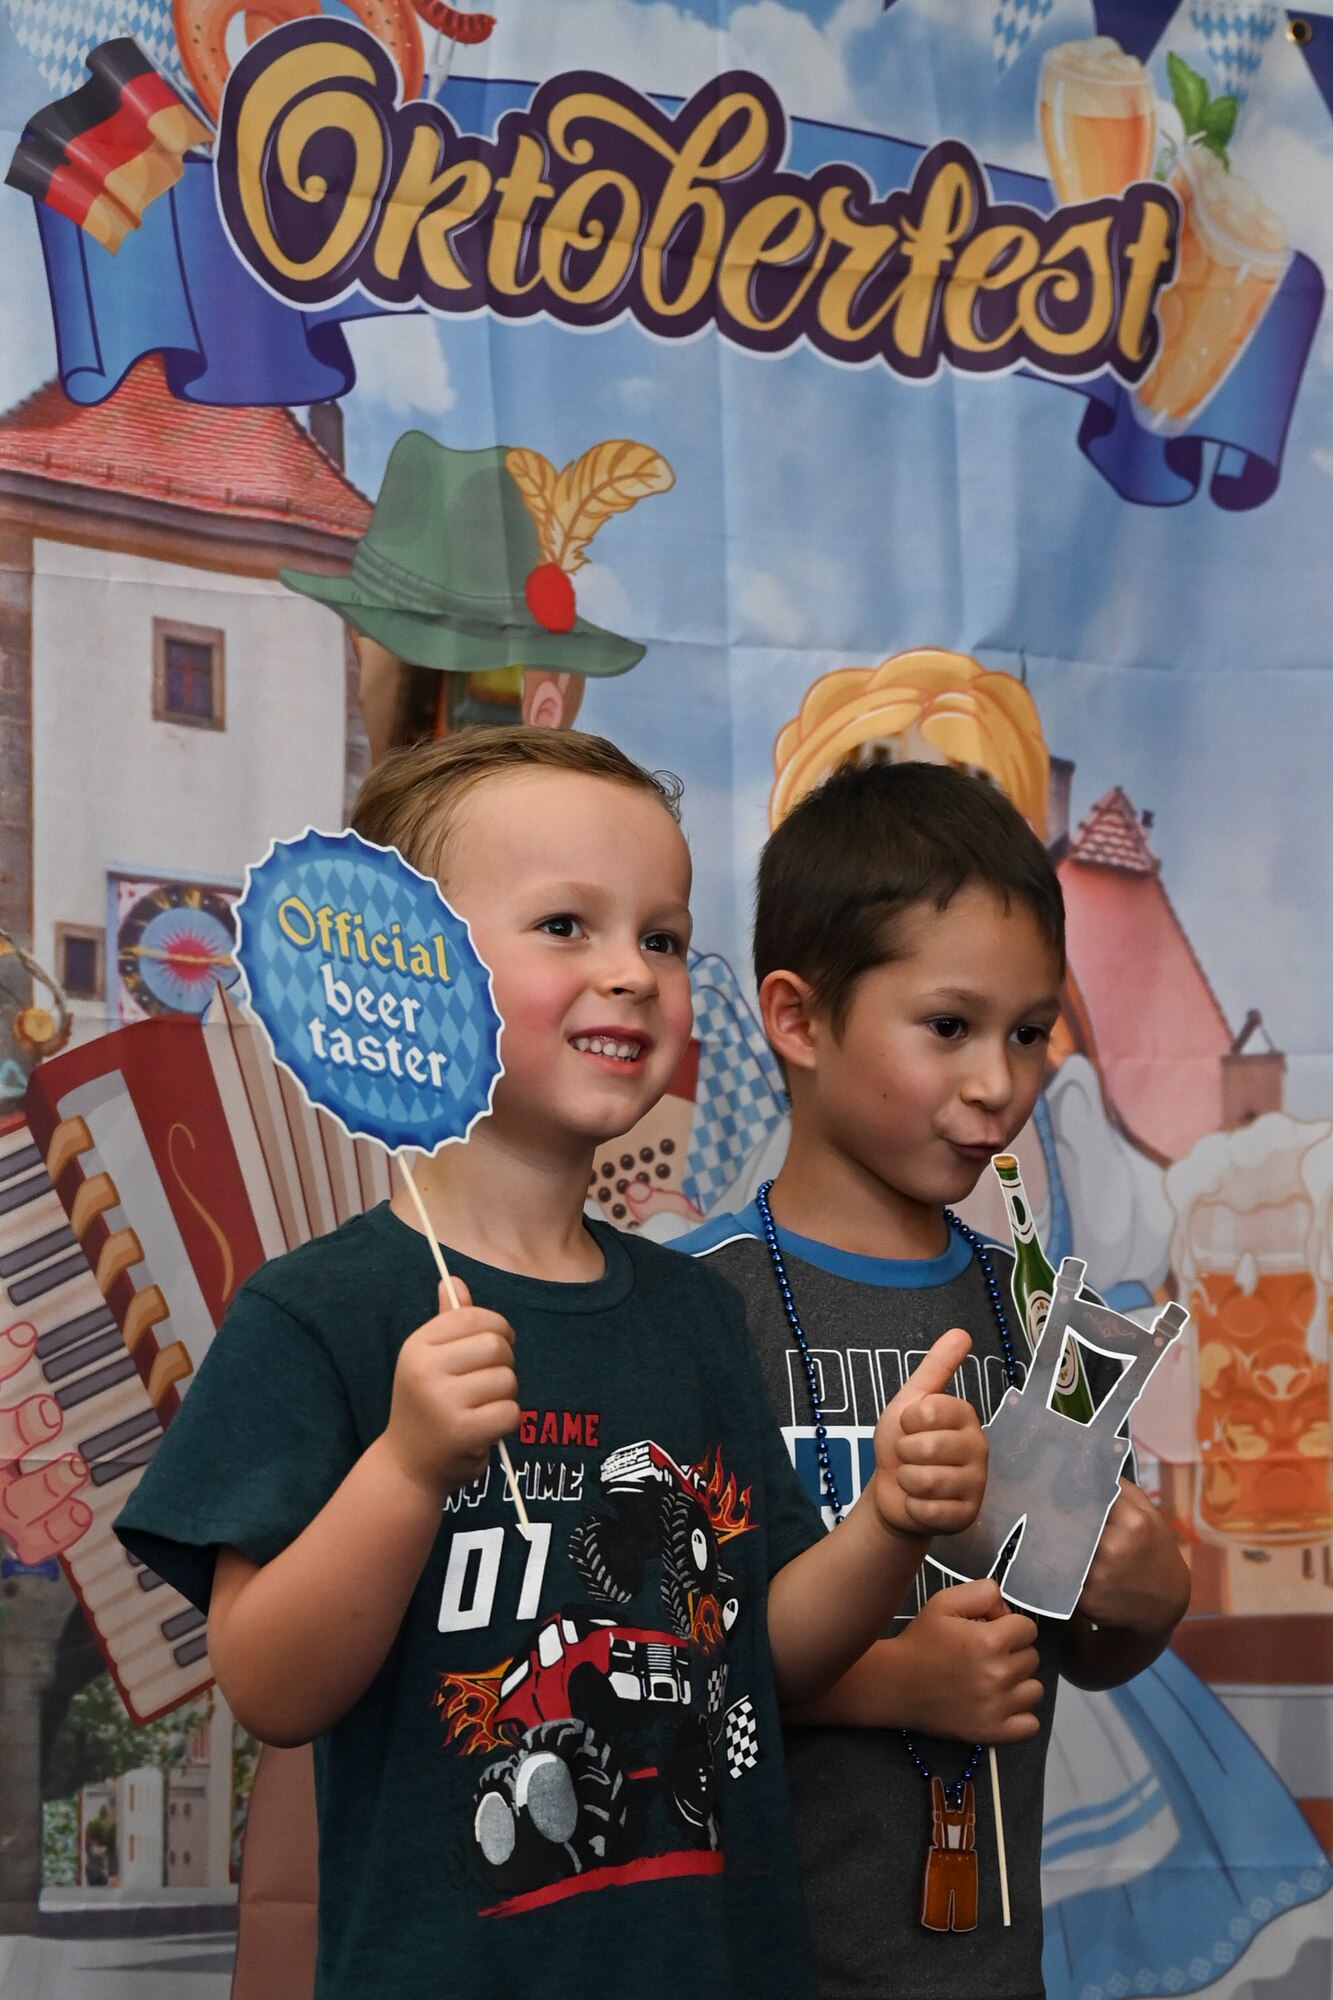 Two Team Andersen kids pose for photos at a photo booth during the 36th Wing First Friday Oktoberfest event at Andersen Air Force Base, Guam, Oct. 6, 2023.